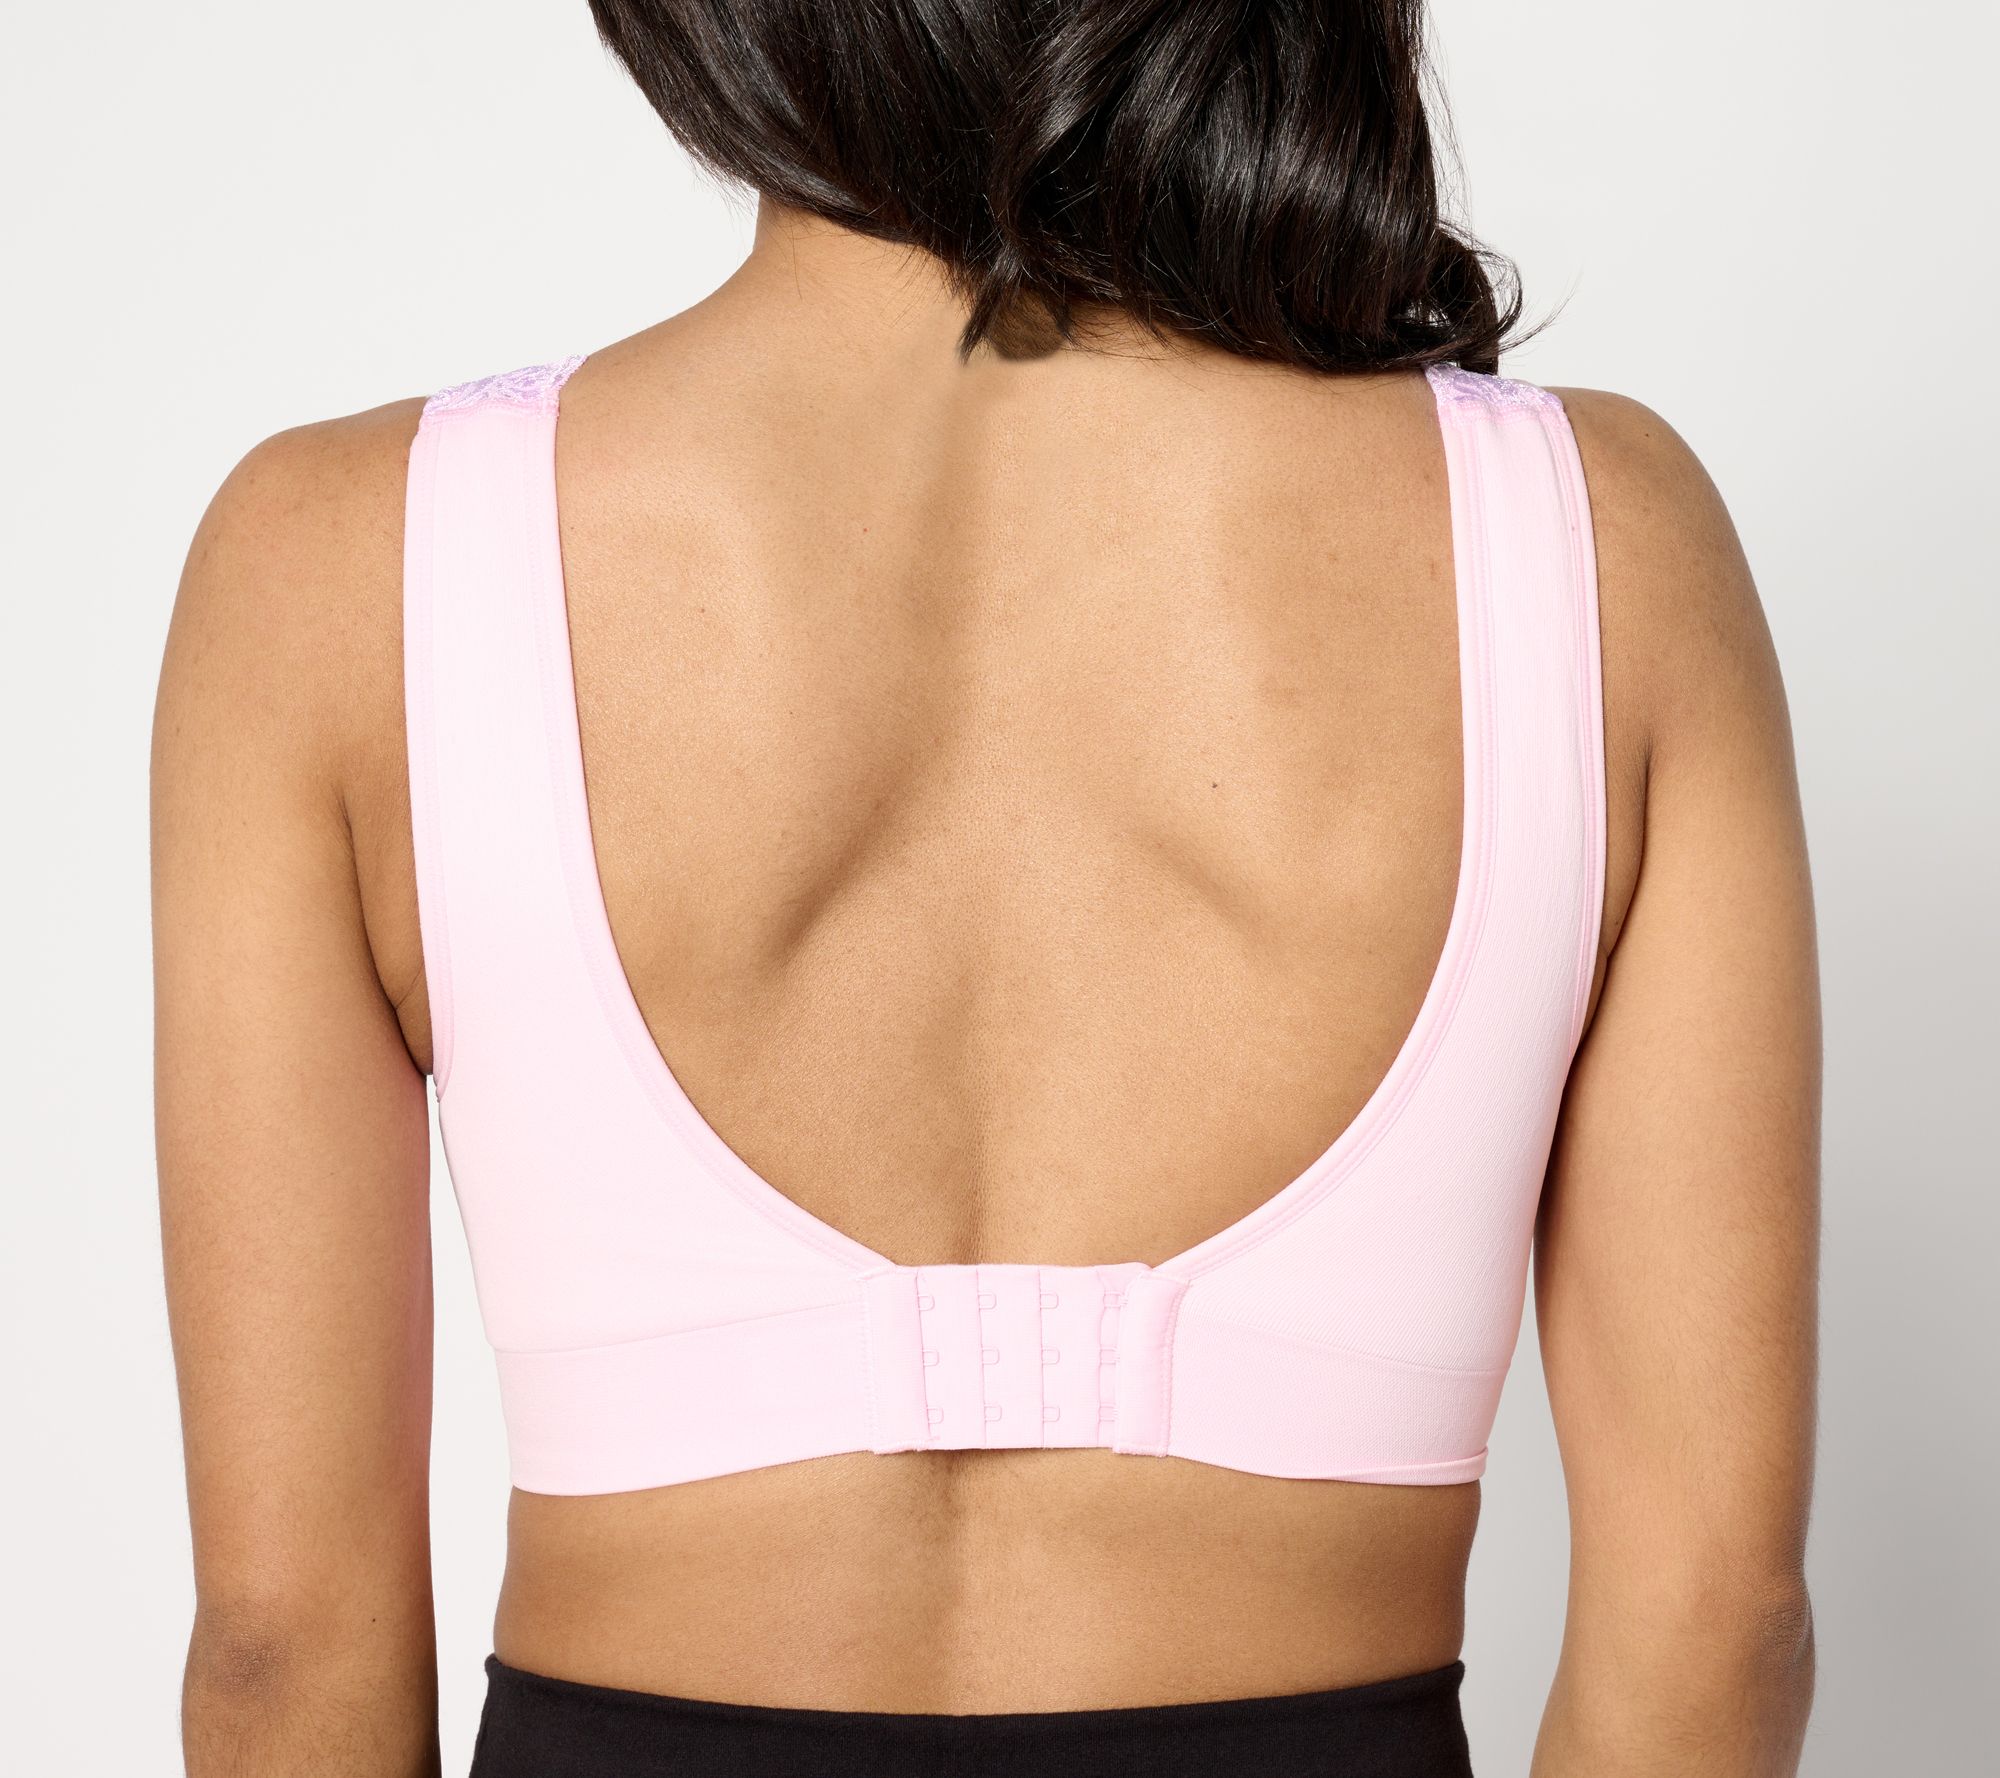 Savvy woman shows how to turn ANY bra into a backless one in seconds and  STILL have support